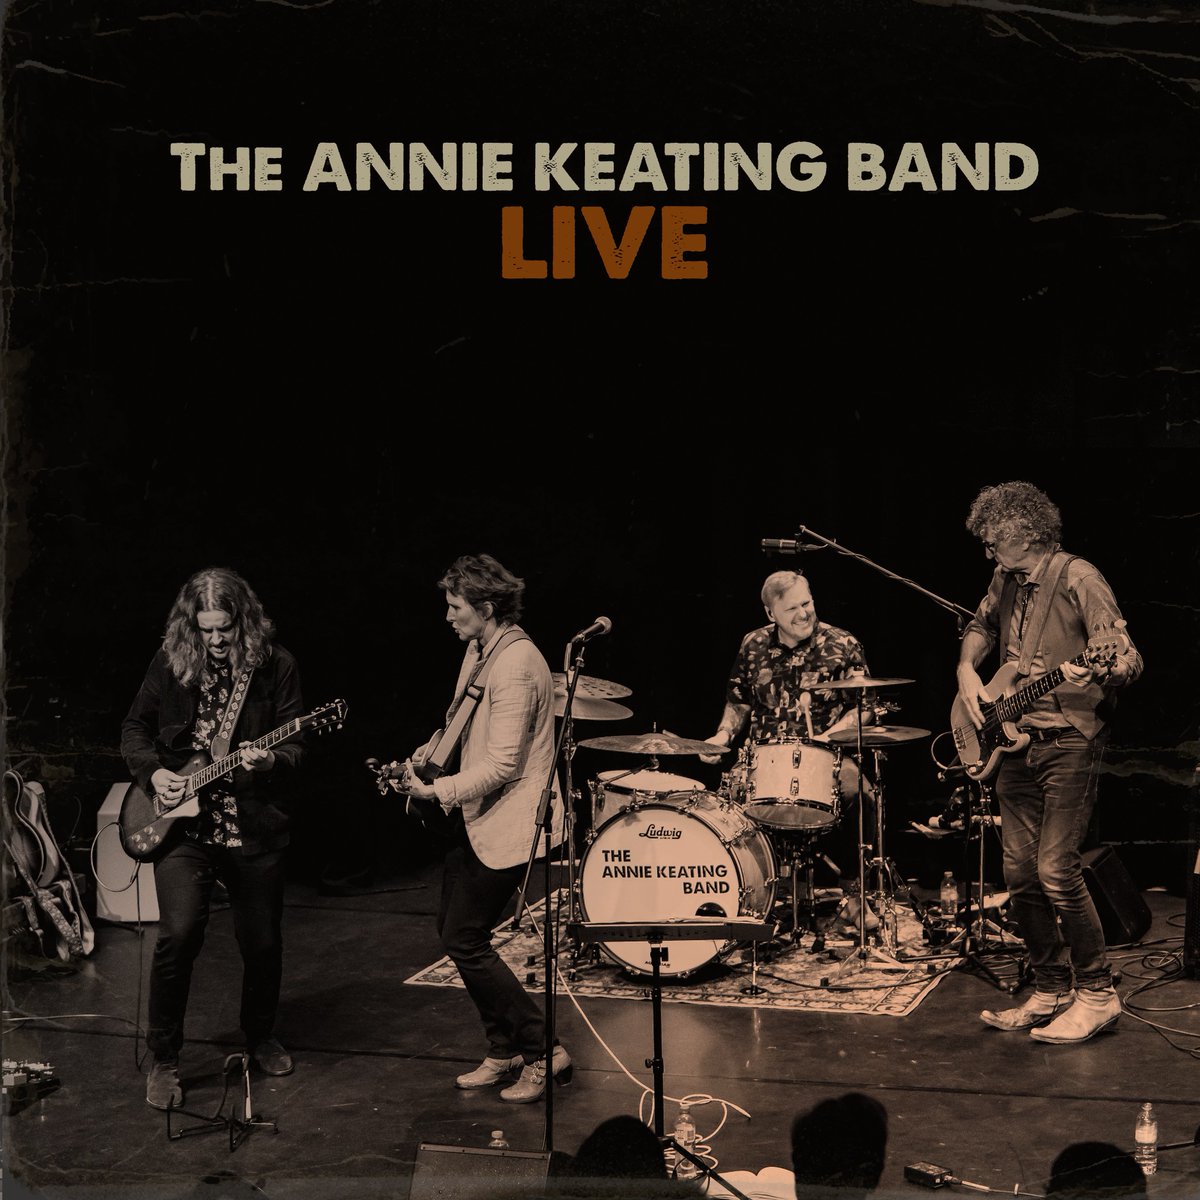 Music friends @leader_music @IanDHall1 @RockingMagpie @FolkShire @PaulKBlabber @americanaUK @Radio_WIGWAM Rumor has it the Annie Keating Band's got a smokin' hot #LIVE #album coming out on #vinyl for #UK summer #festival #shows fancy a preview taste? youtu.be/4SxayijeUSk